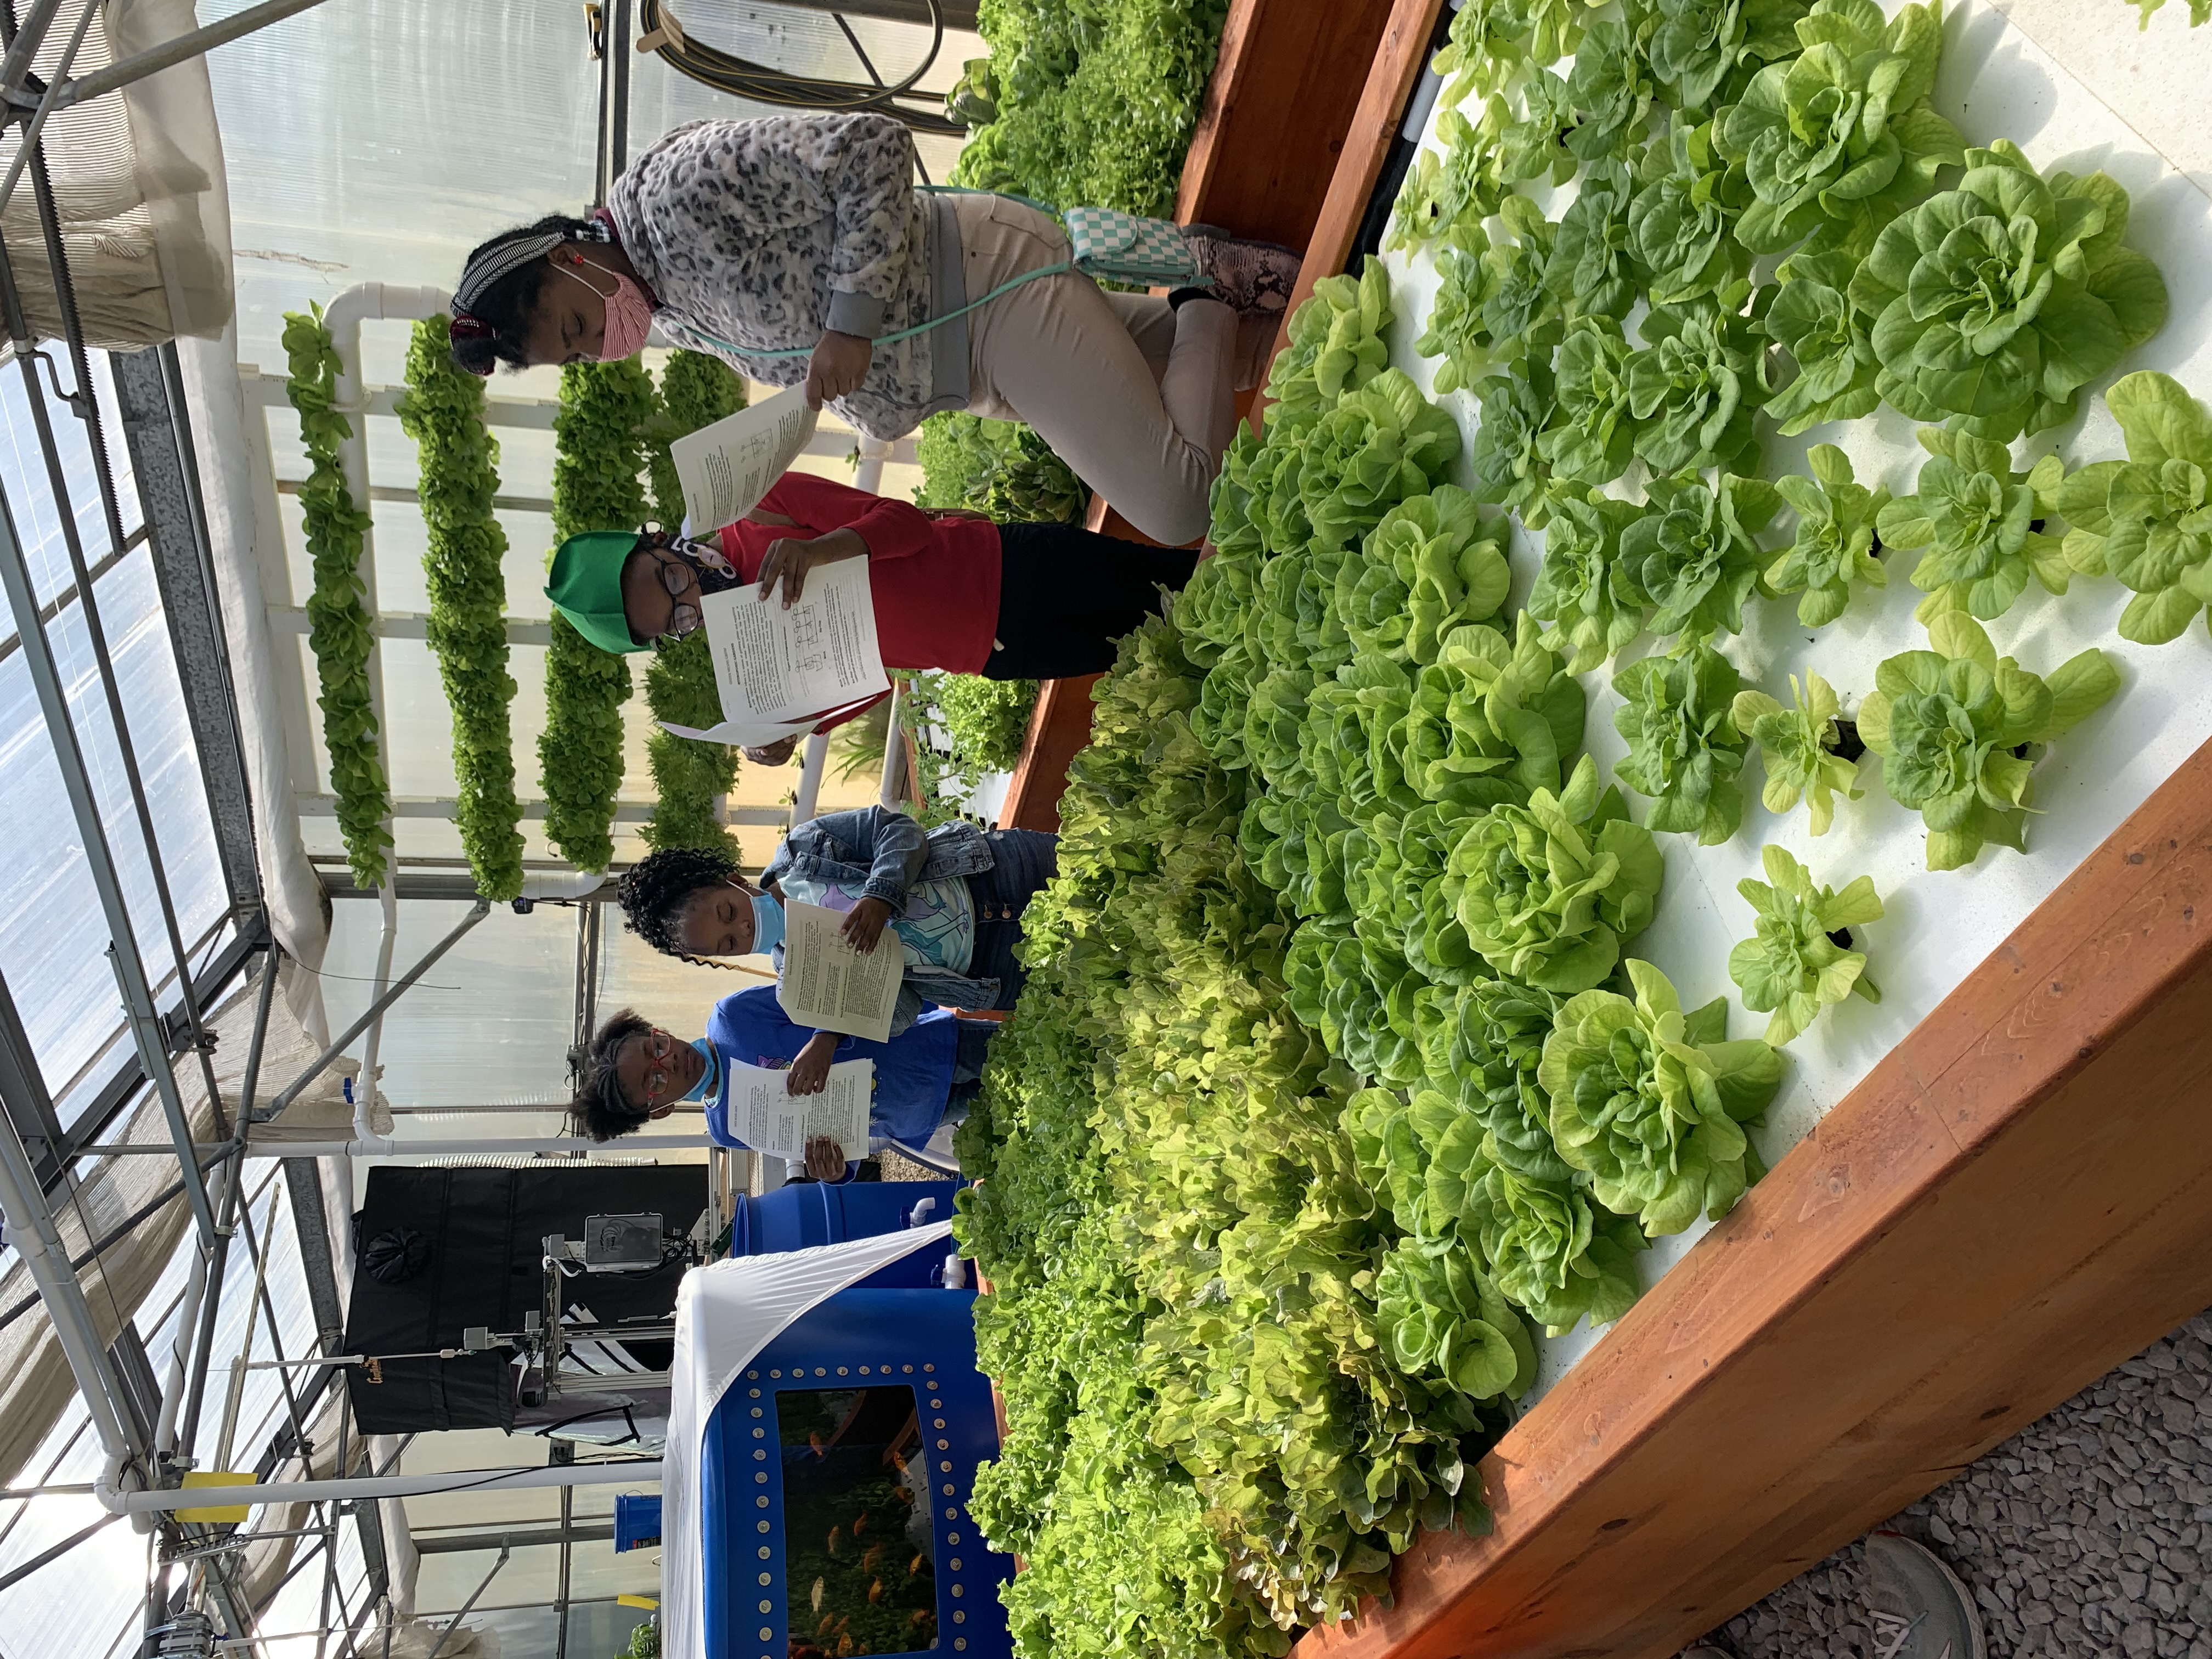 Students at the Jackie Joyner-Kersee Center work in a greenhouse